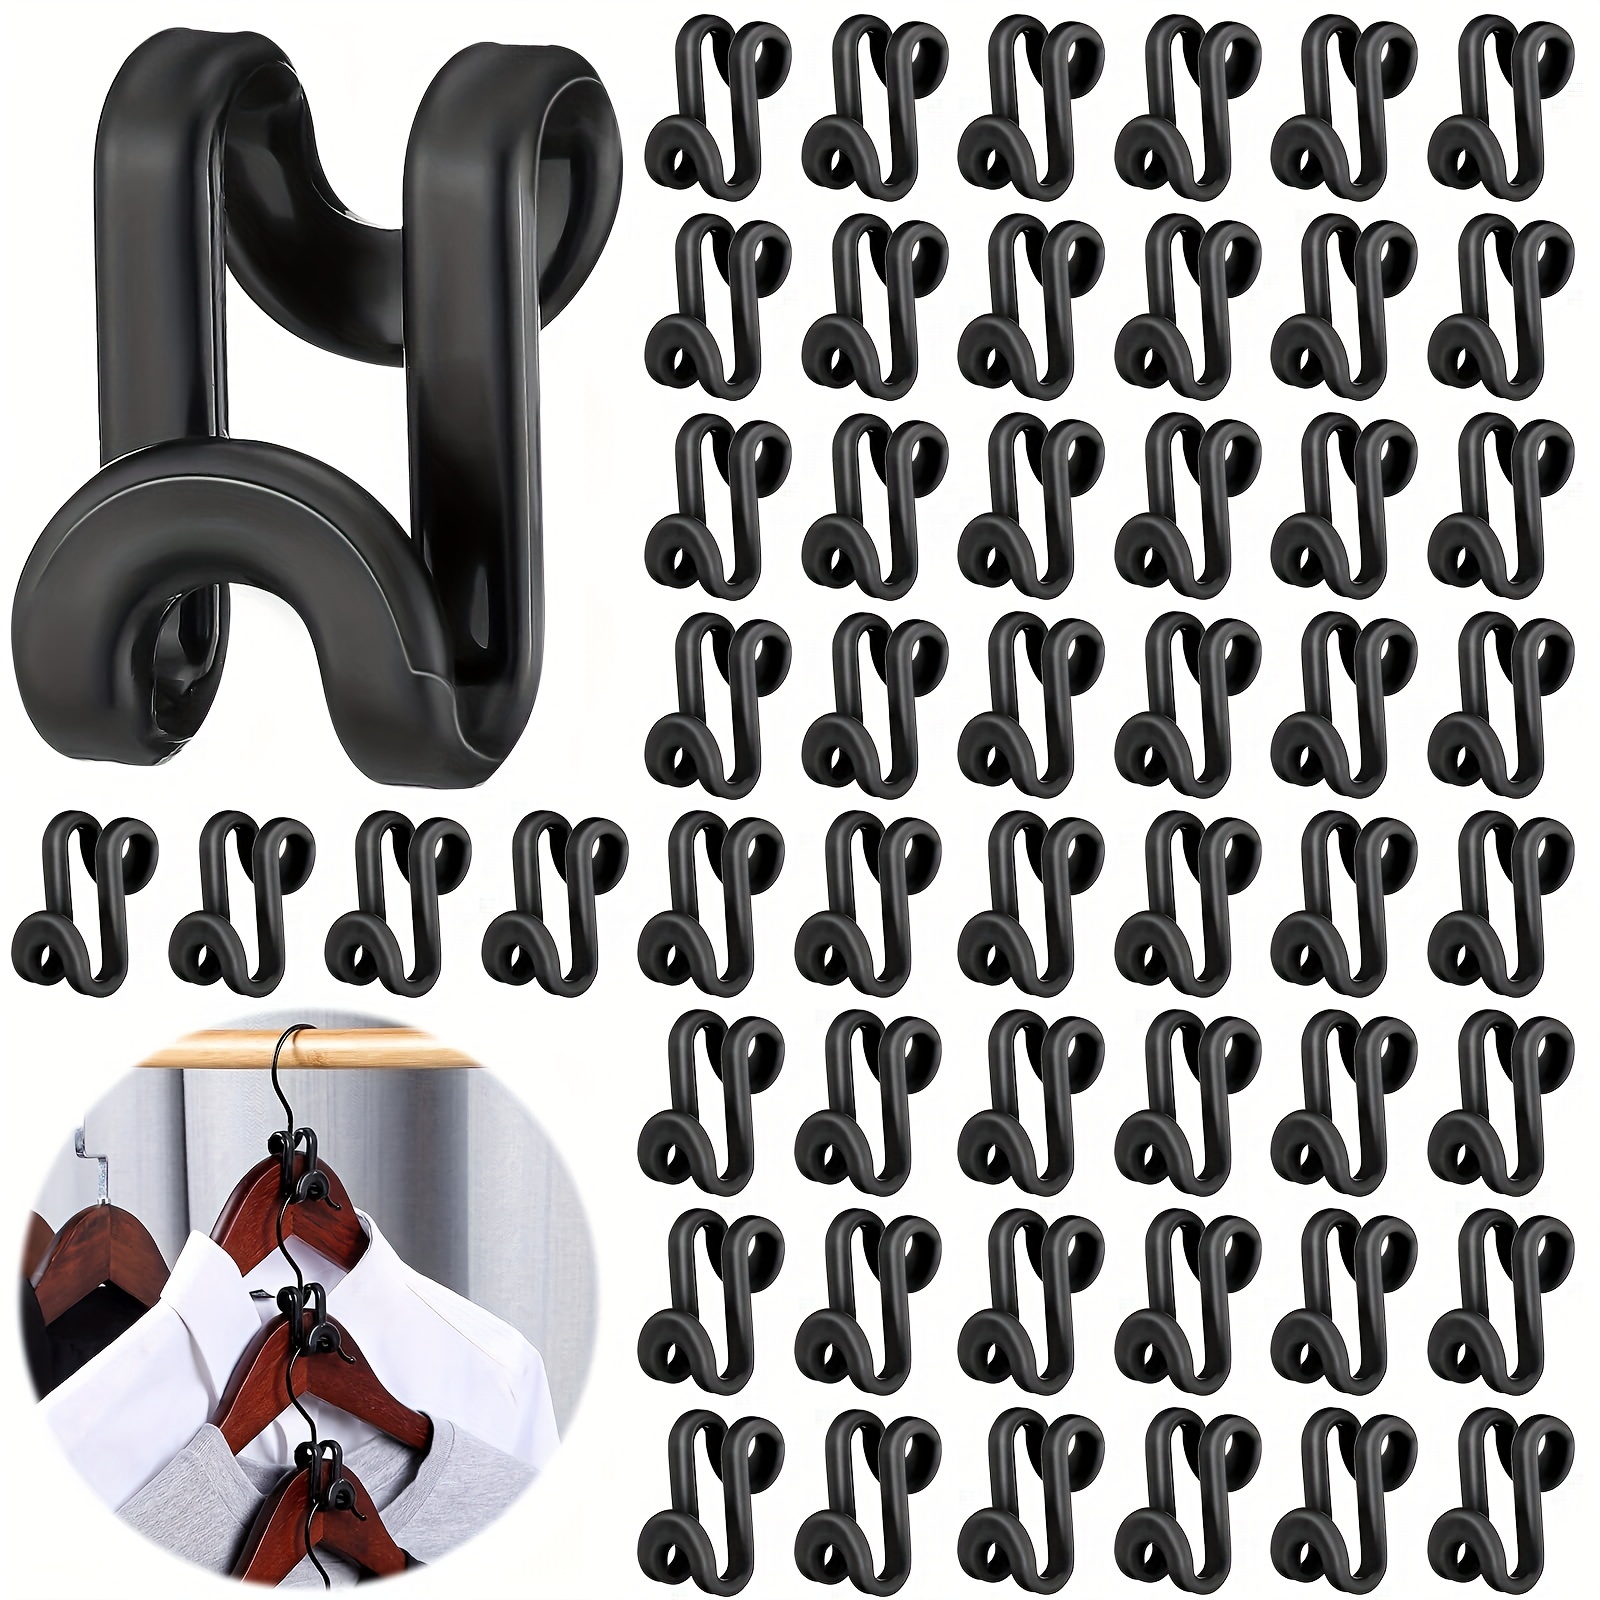 Geilihome Clothes Hanger Connector Hooks, 60PCS Cascading Clothes Hangers  for Heavy Duty Space Saving Cascading Connection Hooks for Clothes Closet